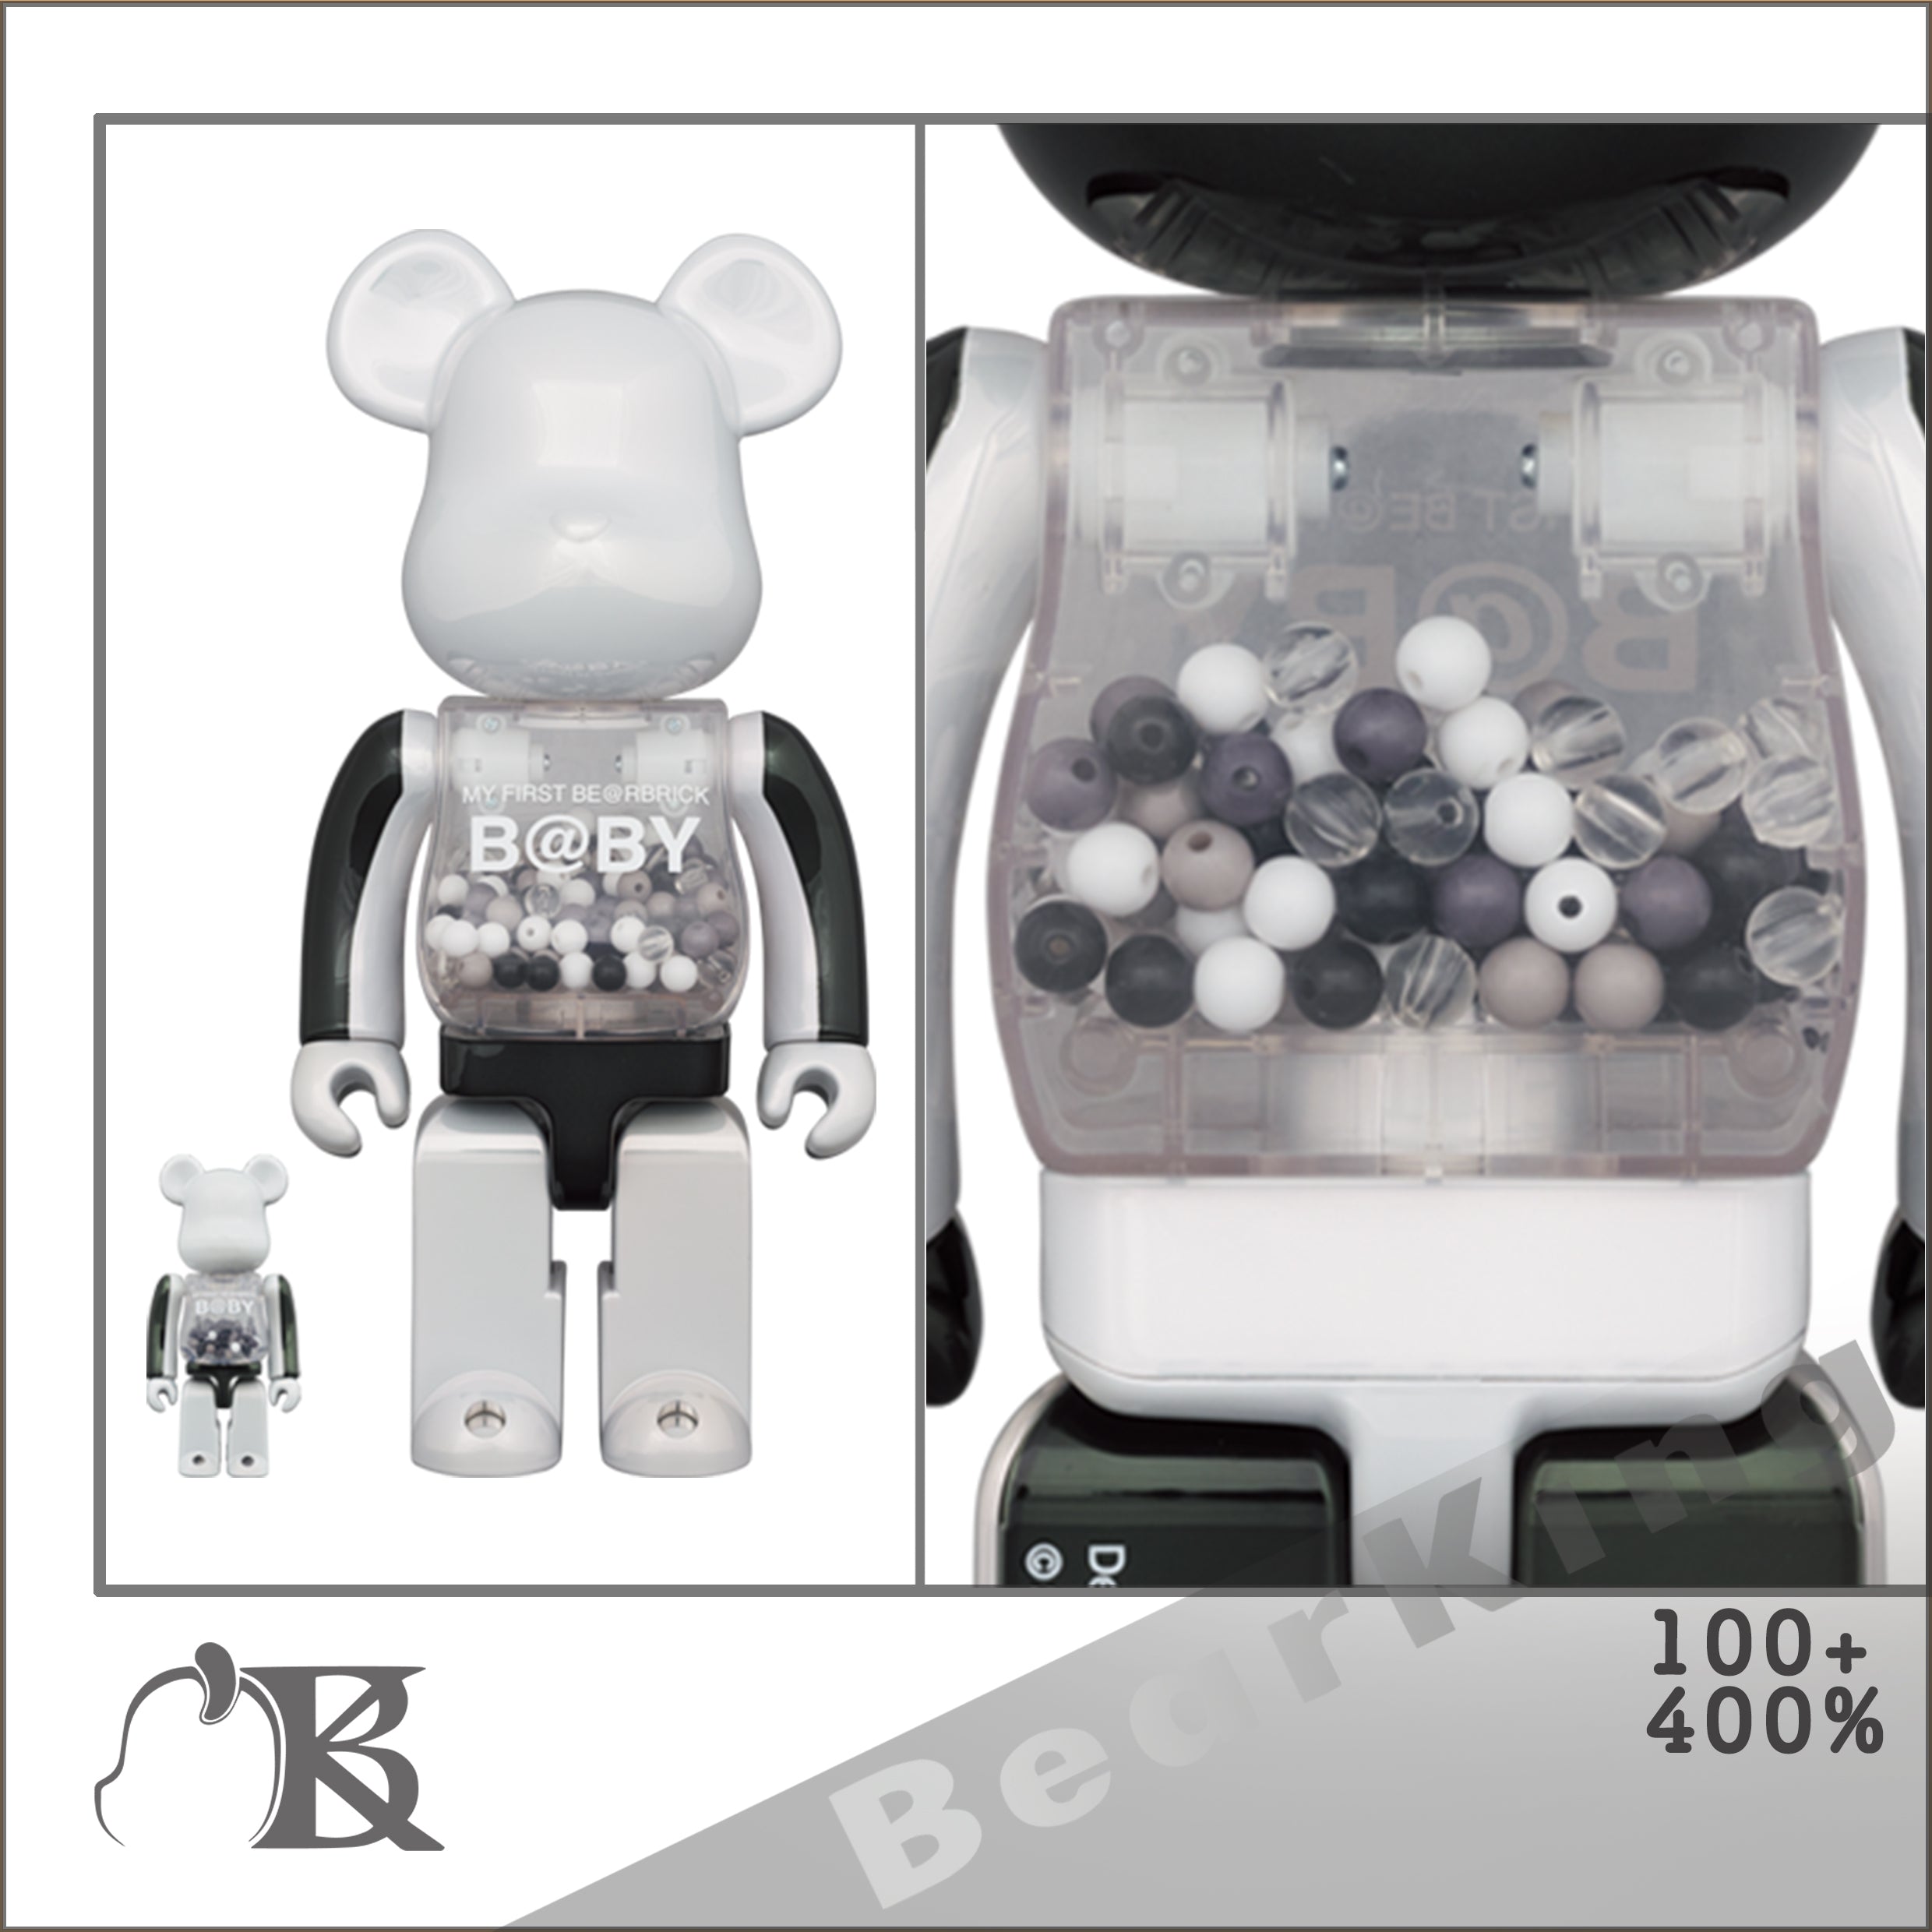 FIRST BE@RBRICK B@BY ANREALAGE100％ 400％エンタメ/ホビー